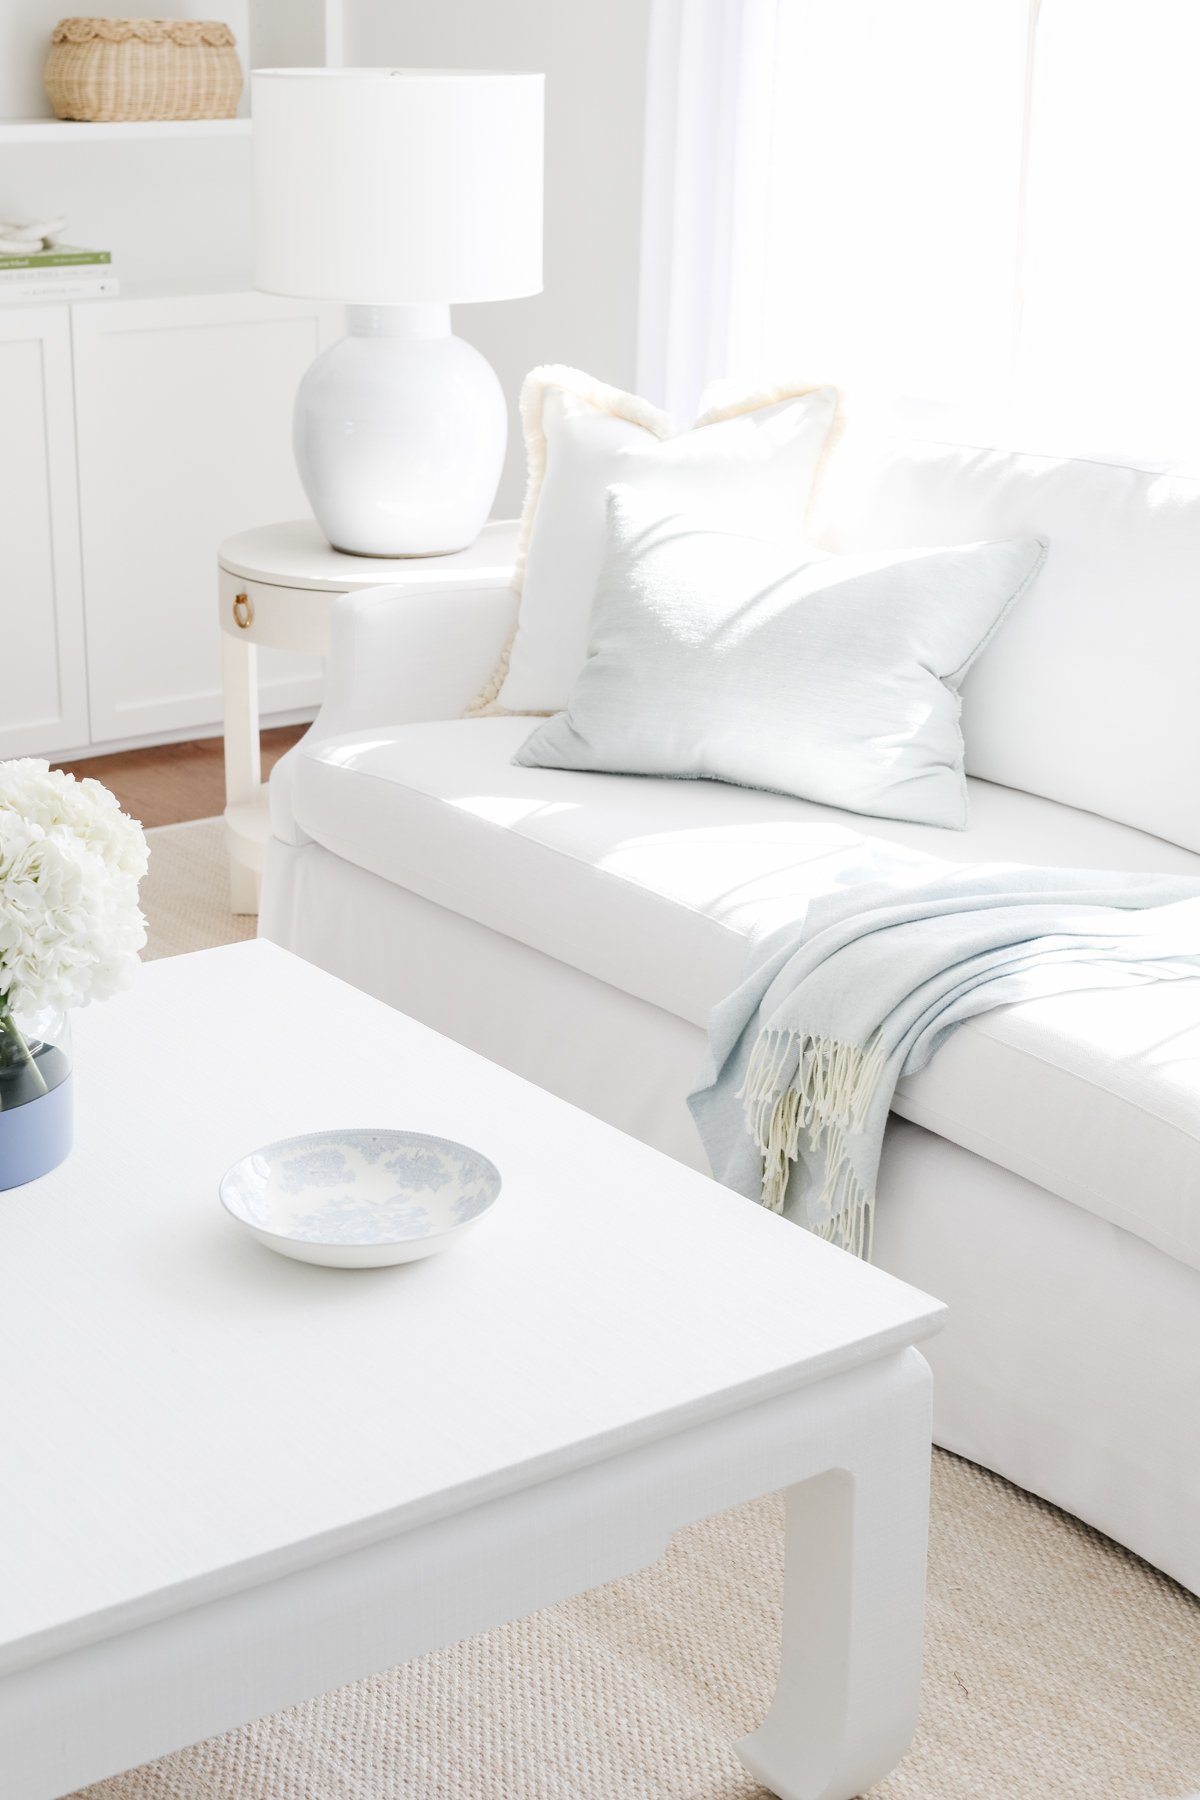 A bright living room with a white sofa, light blue pillow, and sofa throw. A white lamp on a side table and a white coffee table with a light blue dish and vase of white flowers are also seen.